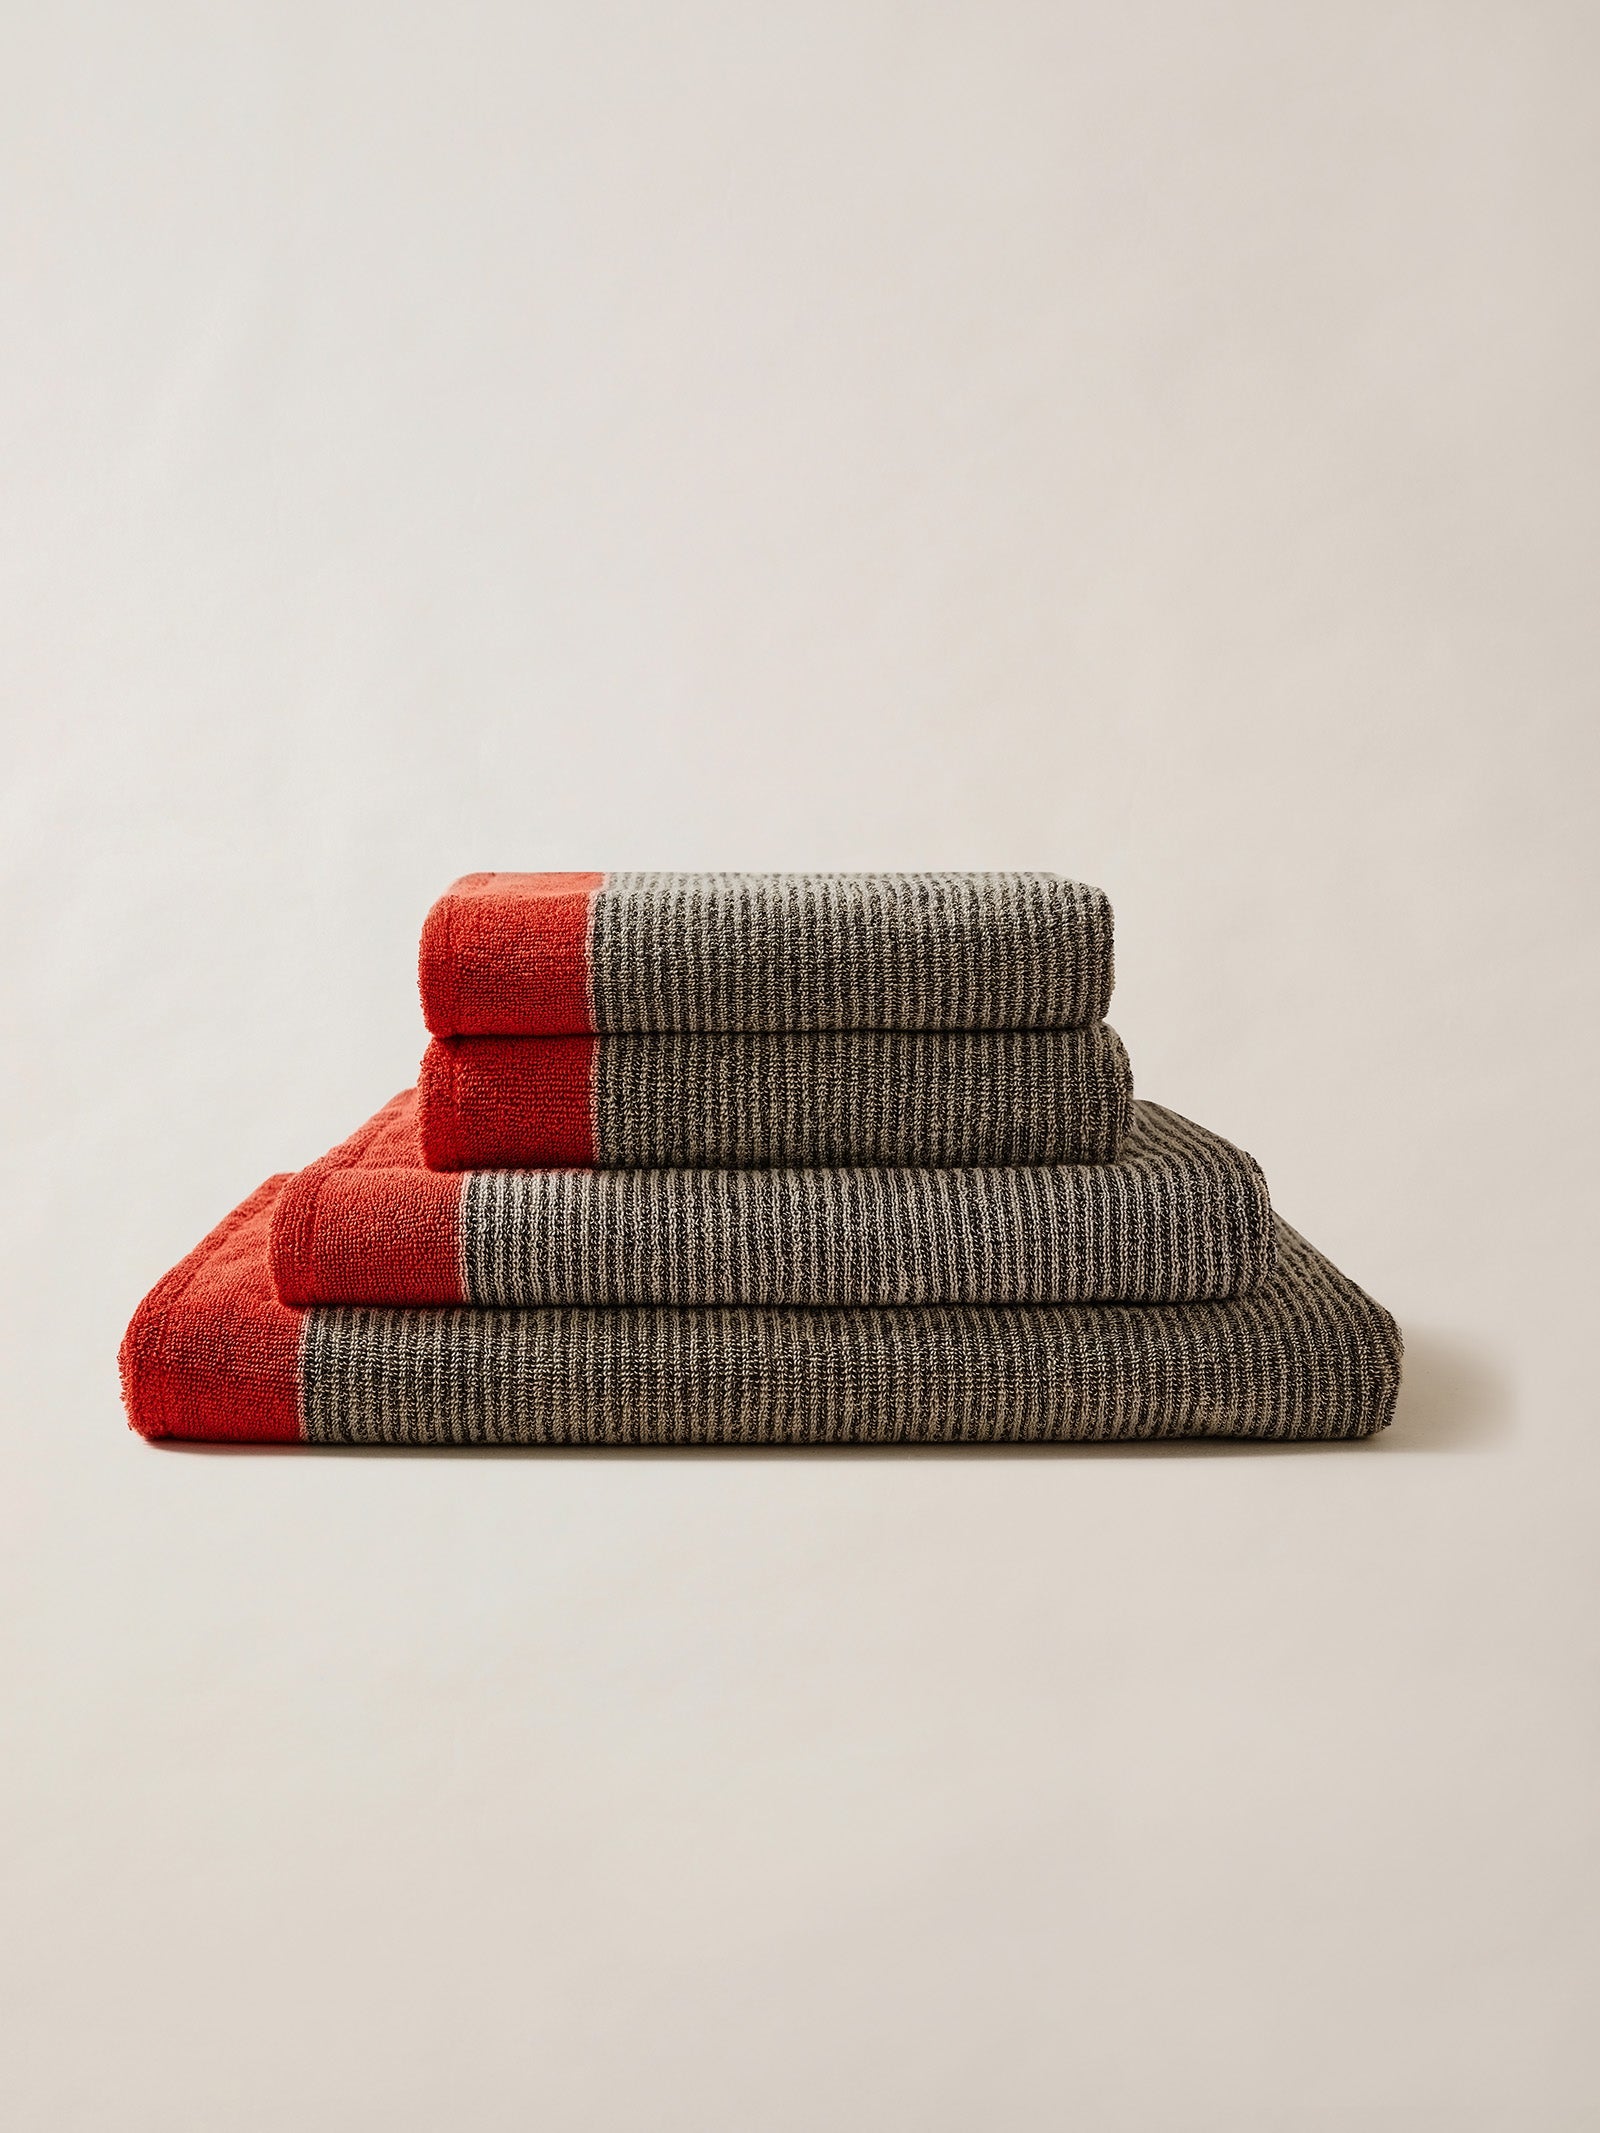 Large Towel - Smoke and Terra Red